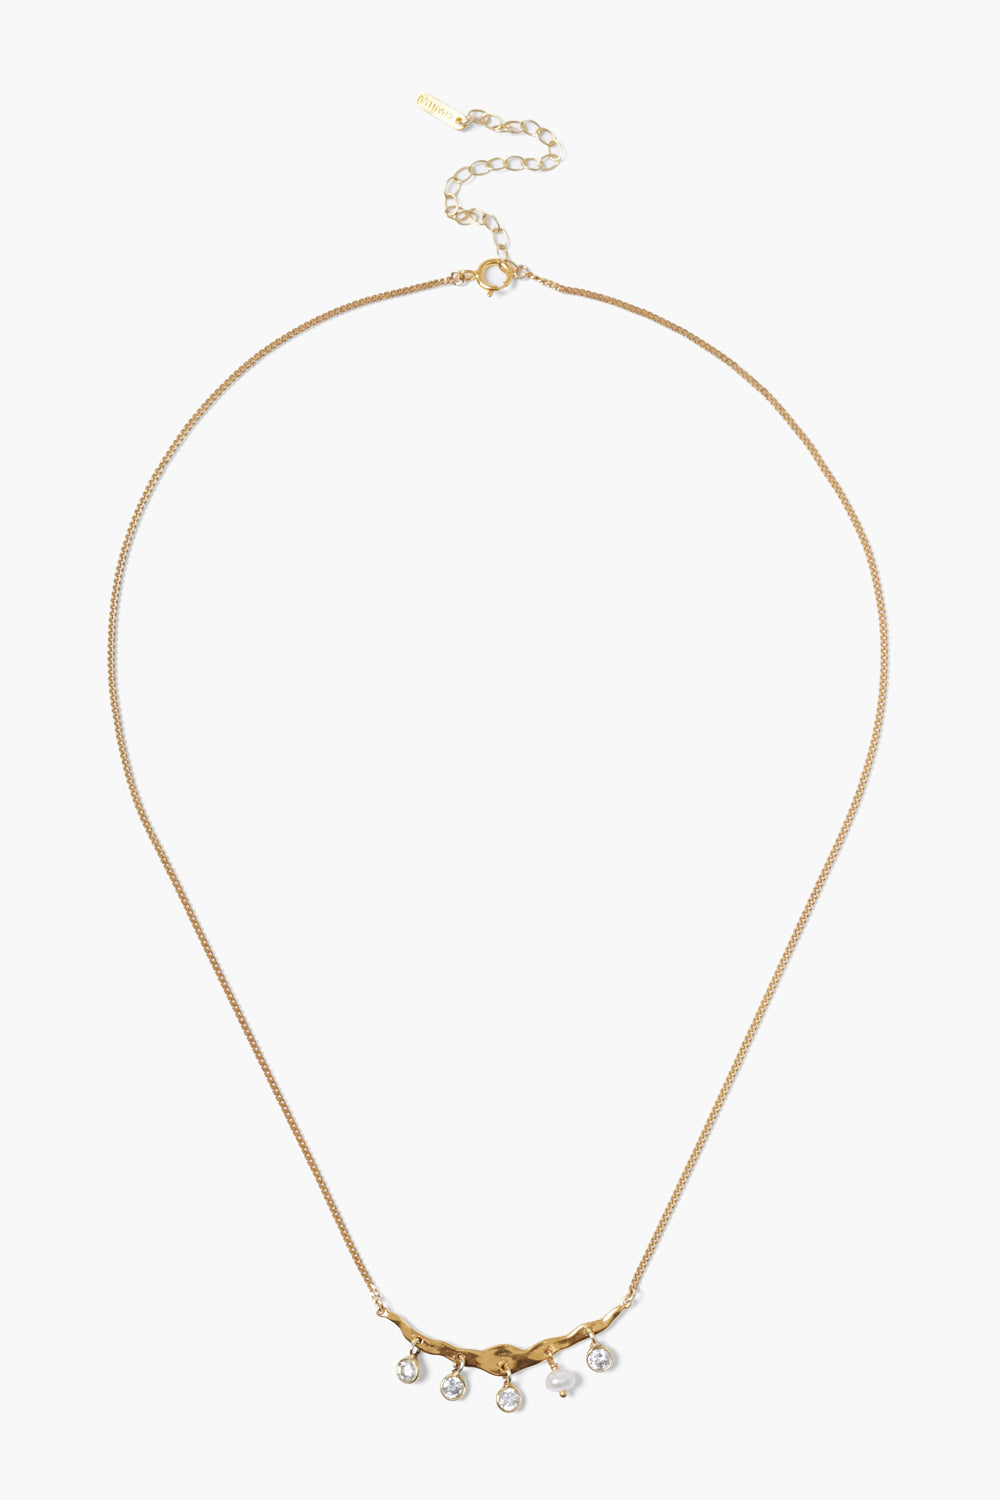 YELLOW GOLD WRAPPED CZ NECKLACE